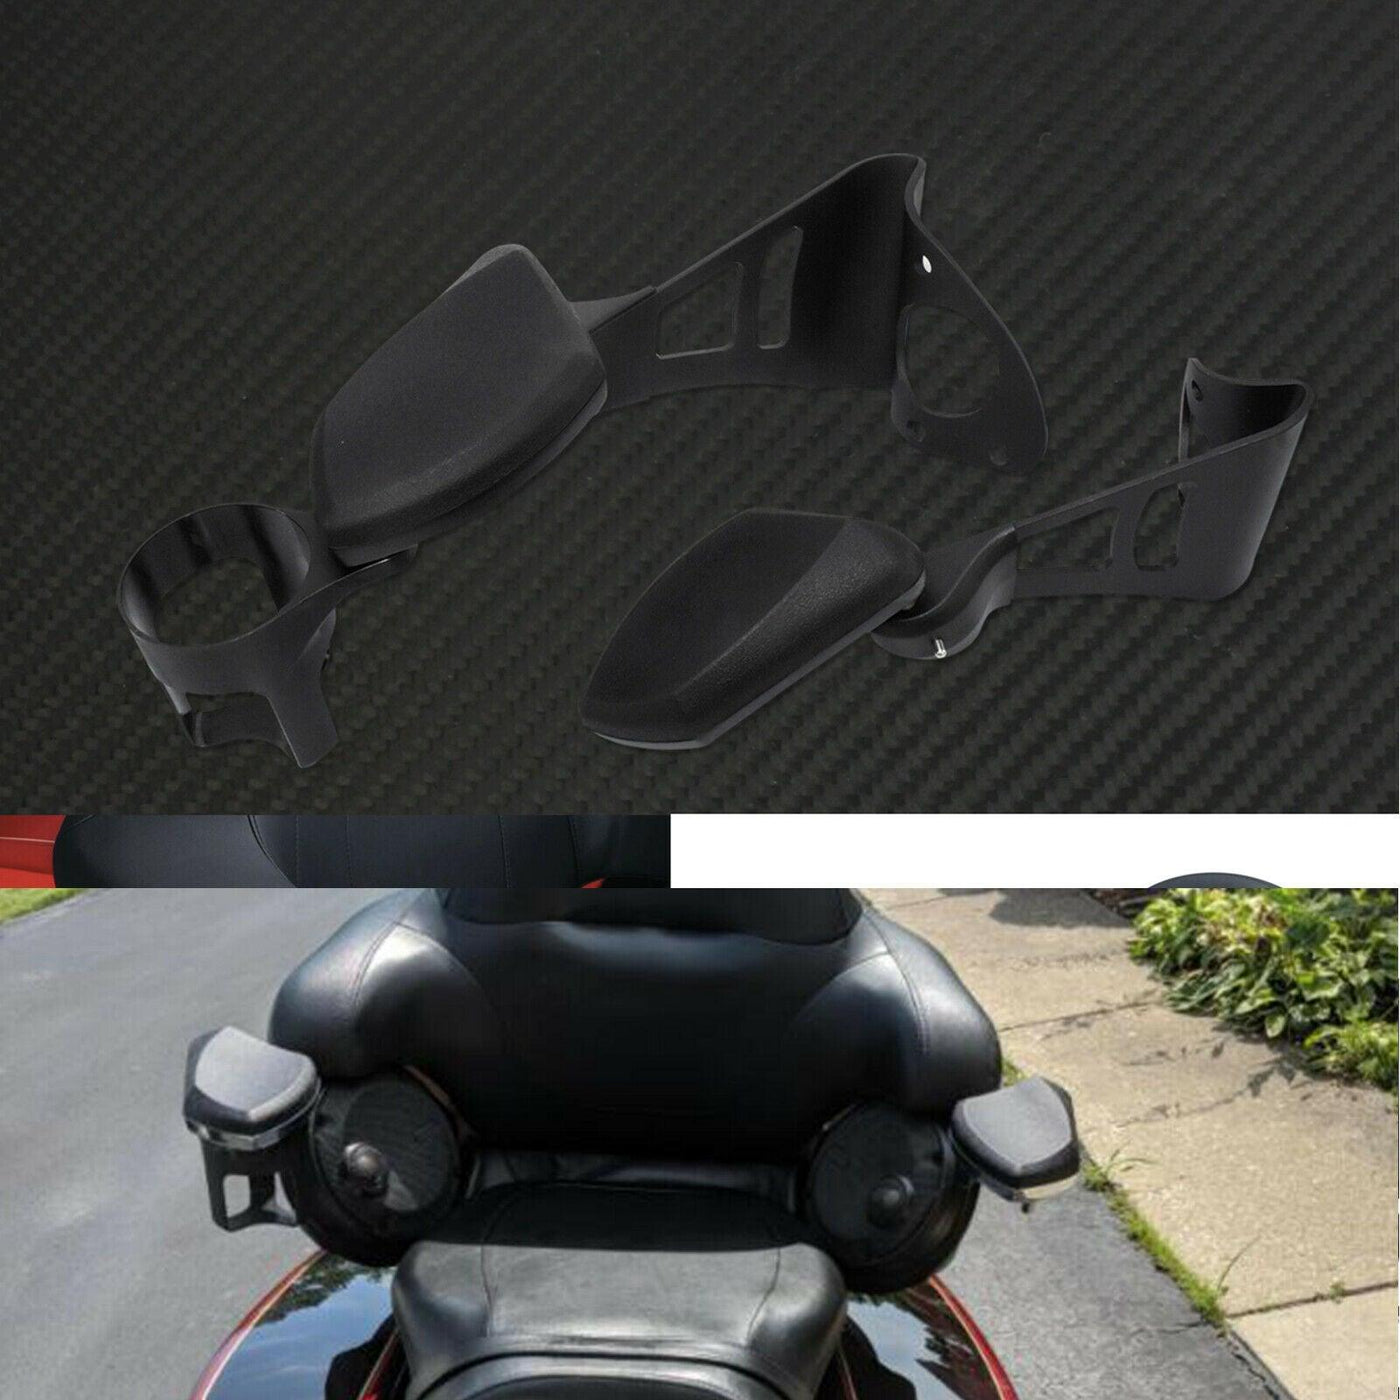 Black Removable Passenger Arm Rests Drink Holder Fit For Harley Touring 2014-19 - Moto Life Products